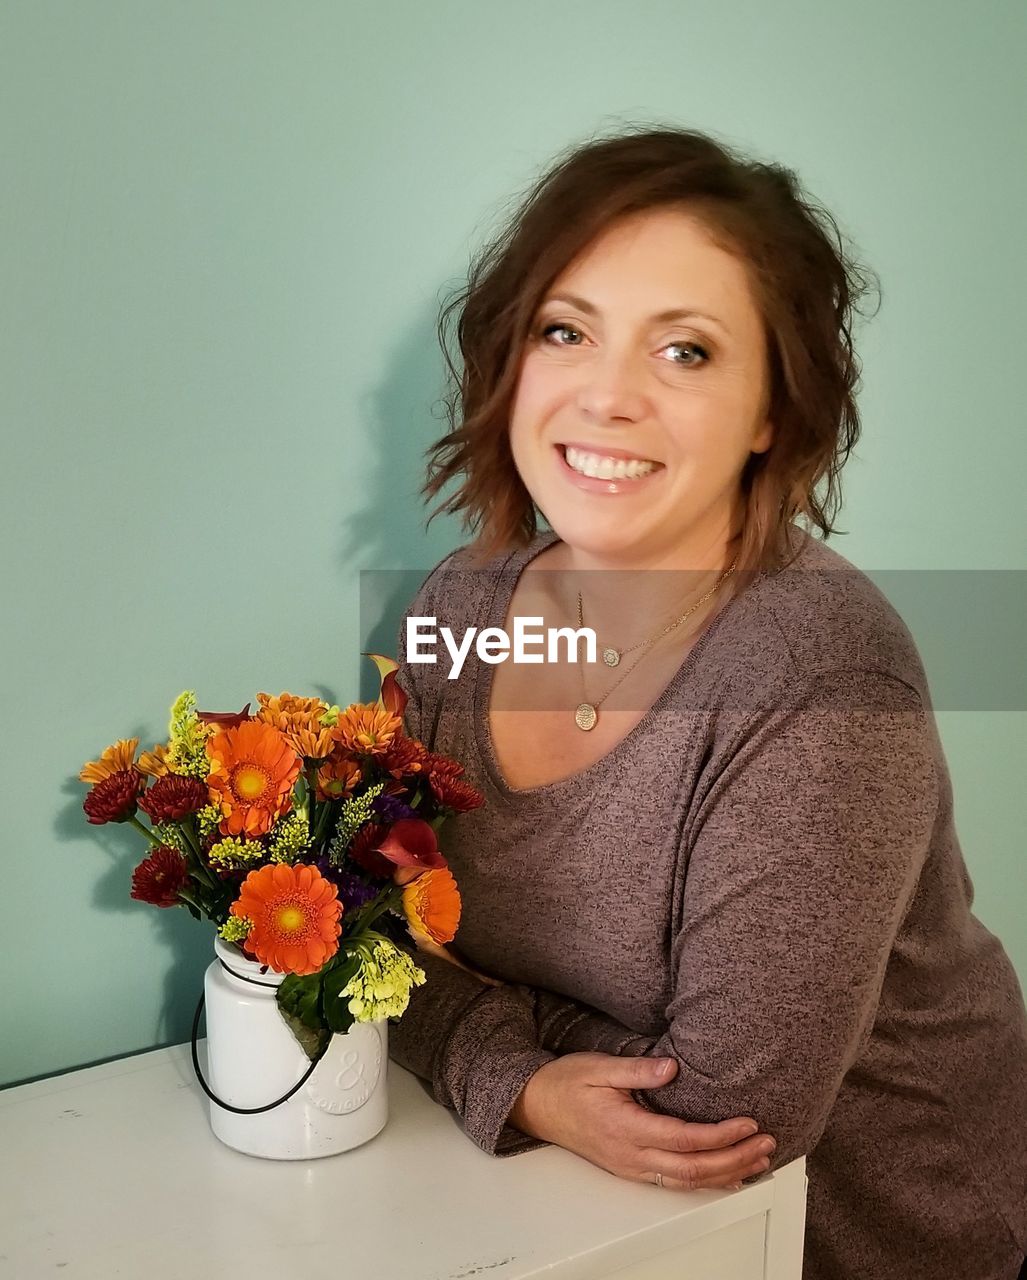 Portrait of smiling woman by flowers in vase on table against wall